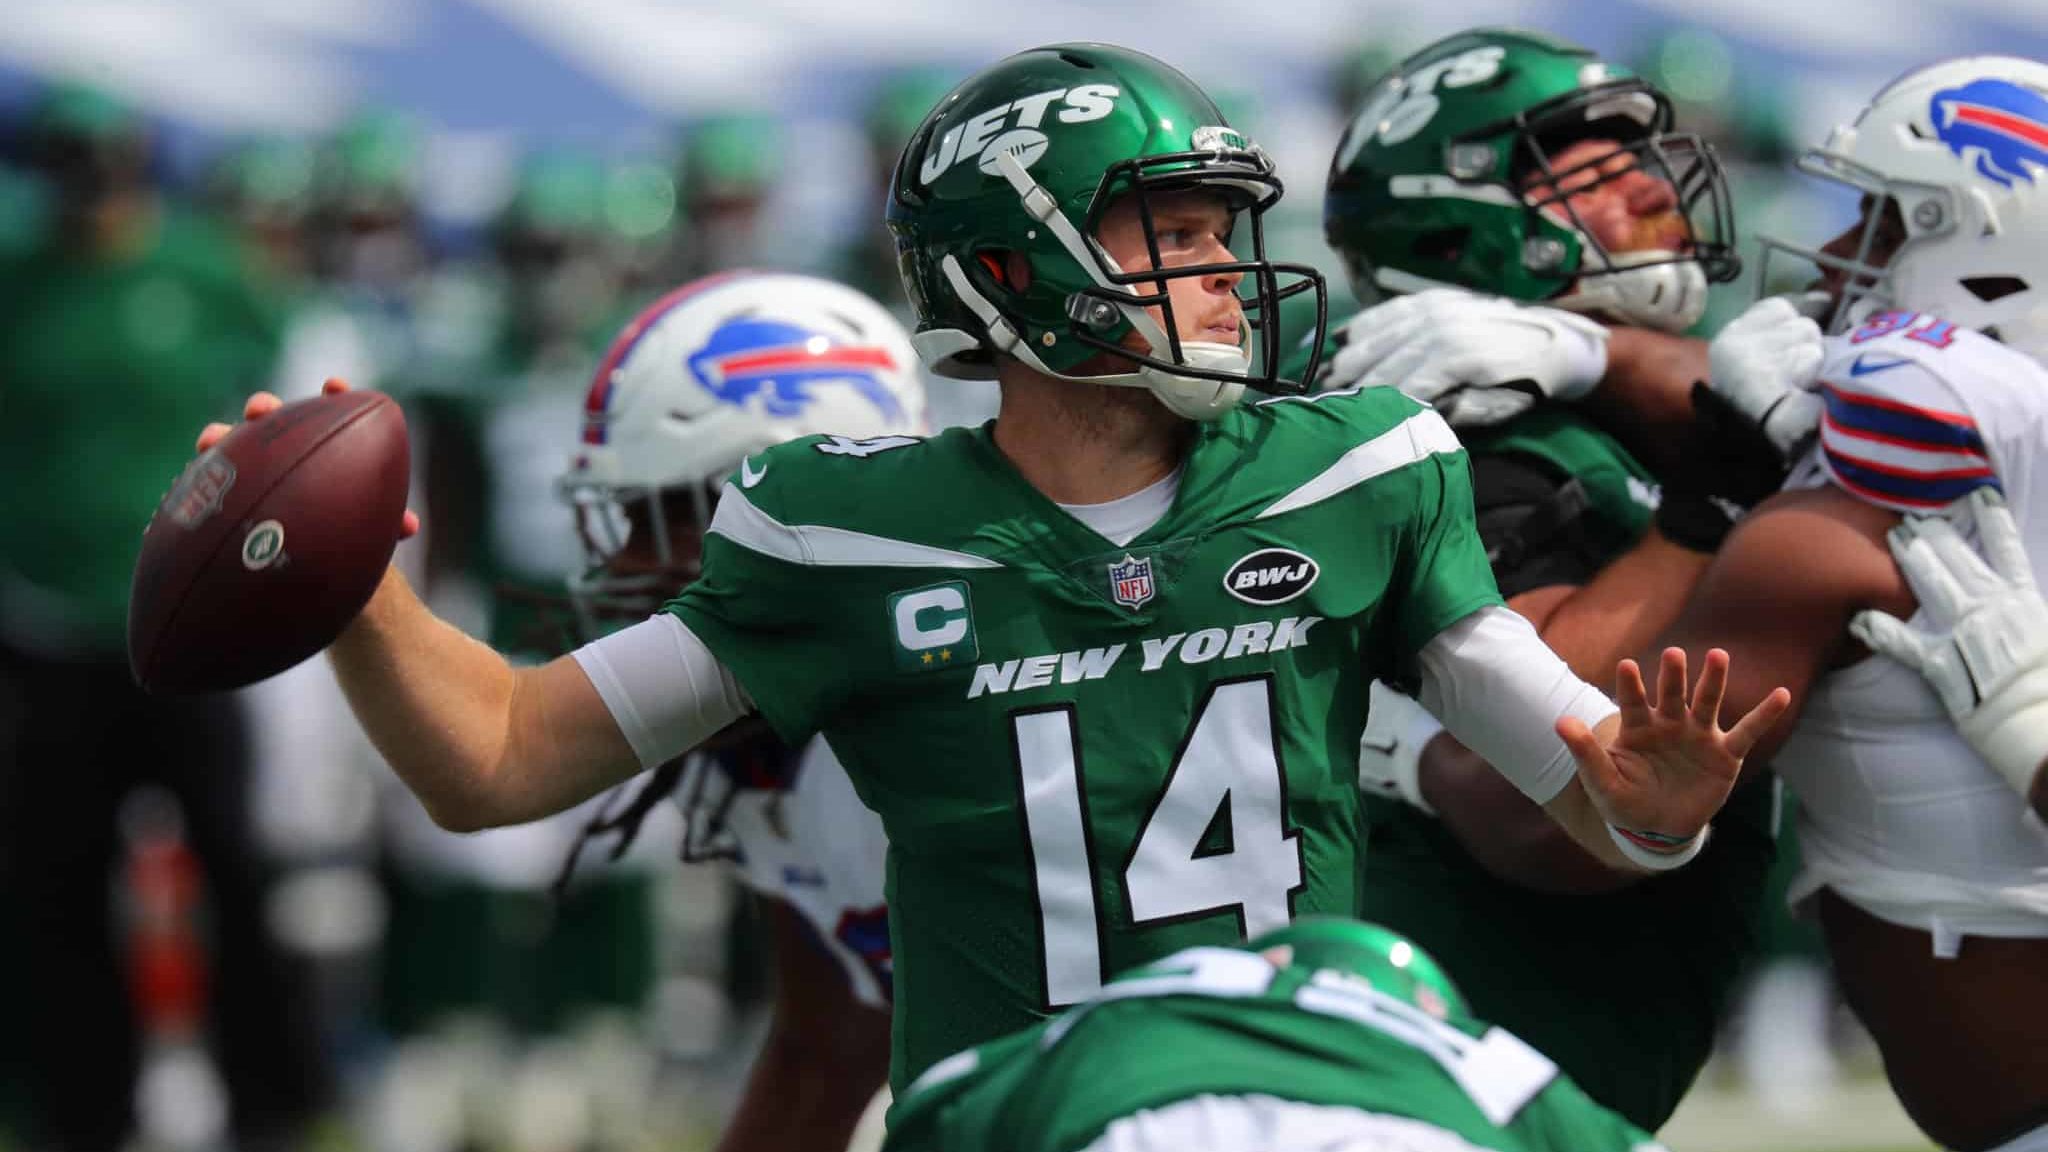 ORCHARD PARK, NY - SEPTEMBER 13: Sam Darnold #14 of the New York Jets throws a pass during the first quarter against the Buffalo Bills at Bills Stadium on September 13, 2020 in Orchard Park, New York.